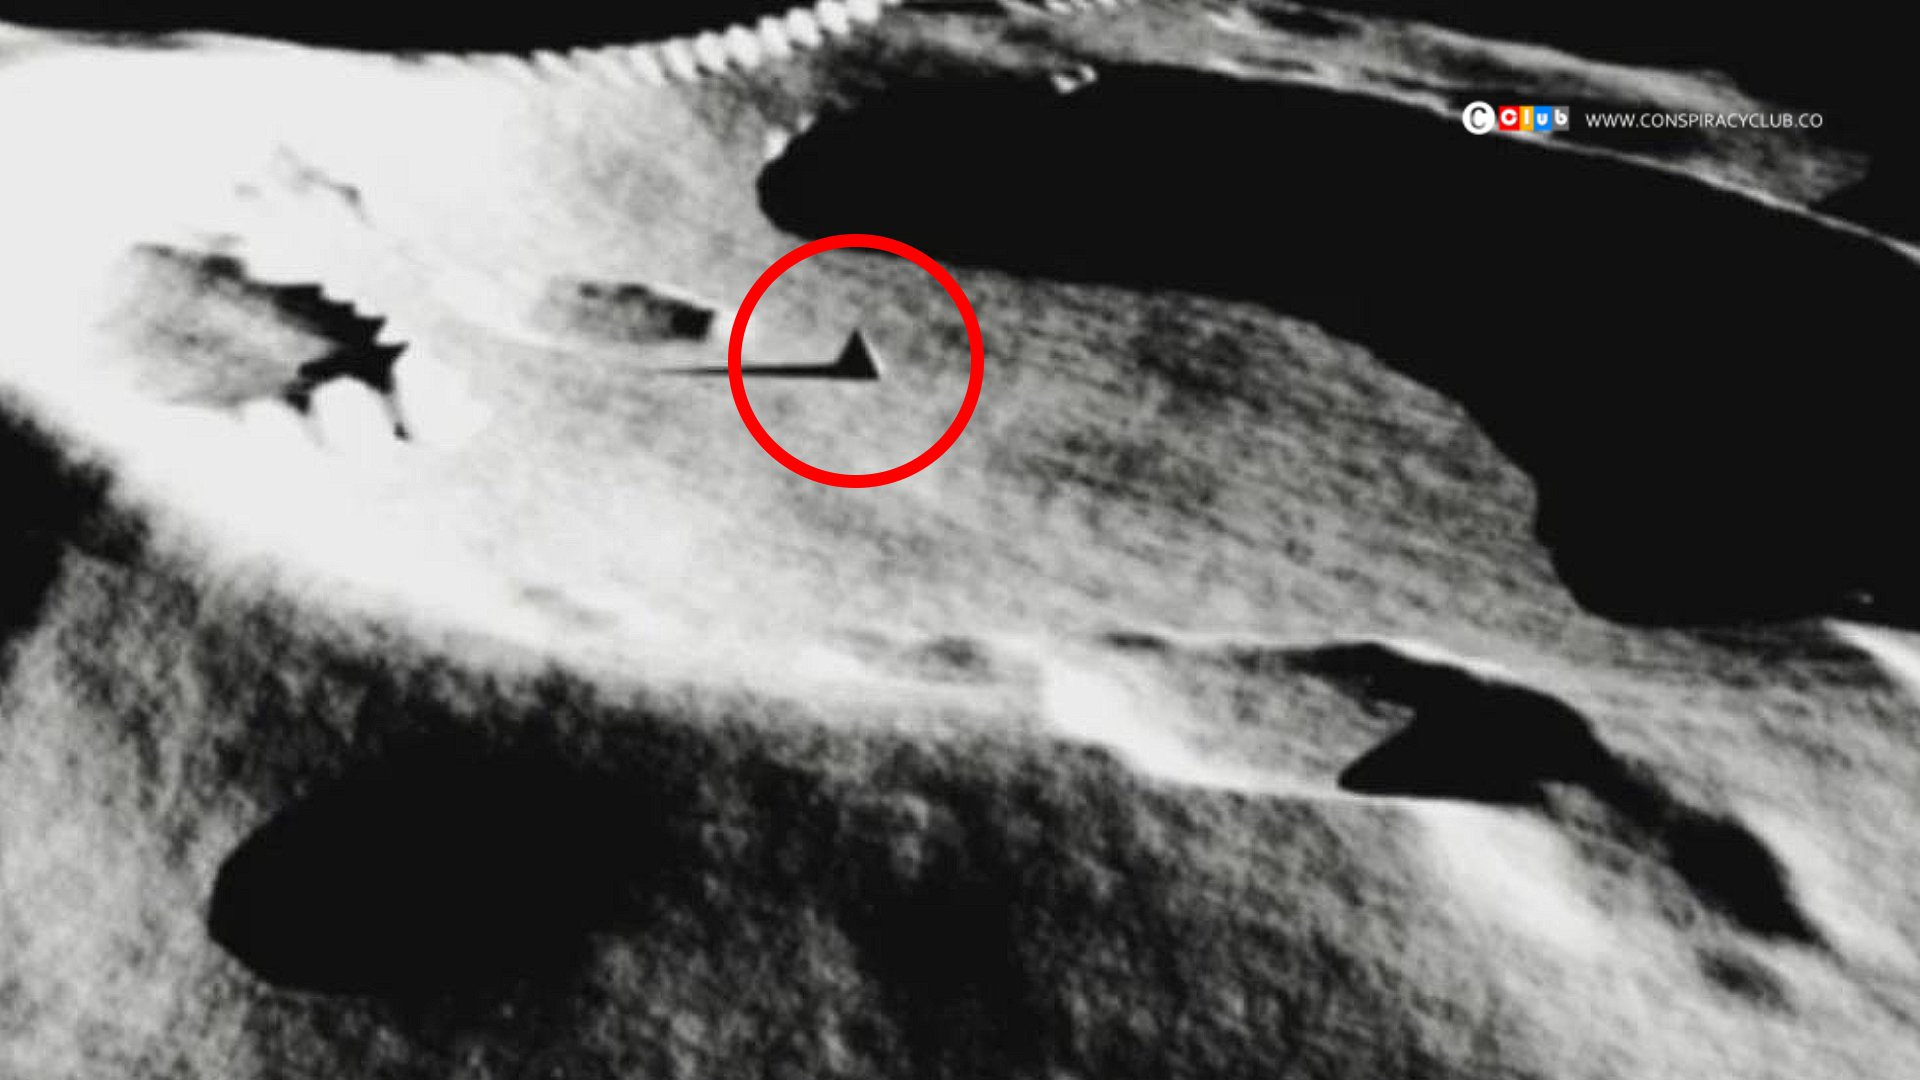 22 Strange Unexplainable Images That Will Give You The Creeps